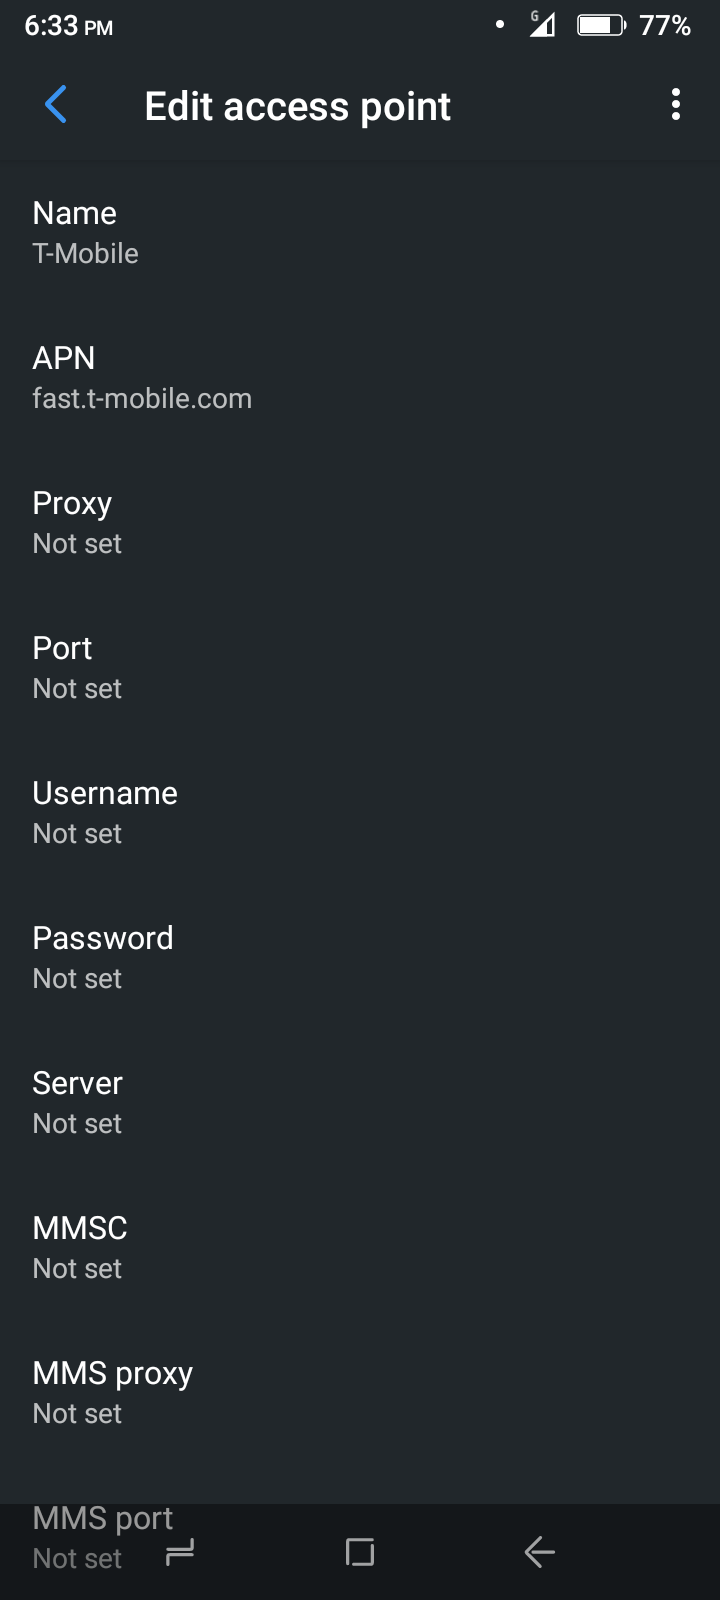 apn settings that can be changed by the user